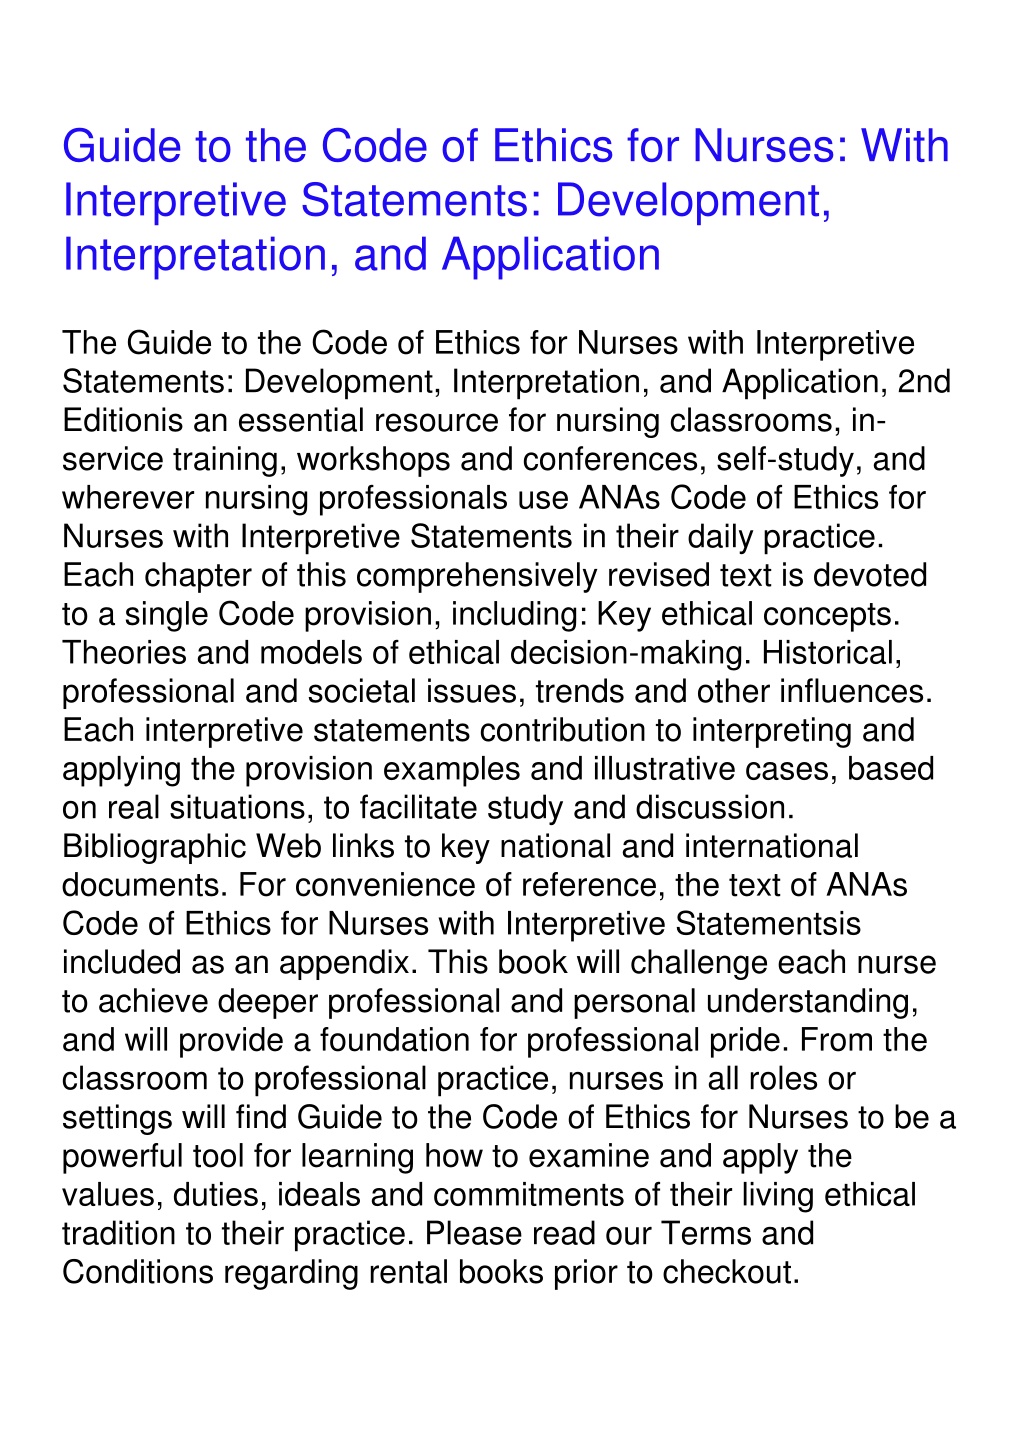 Ppt Read Pdf Guide To The Code Of Ethics For Nurses With Interpretive Statements